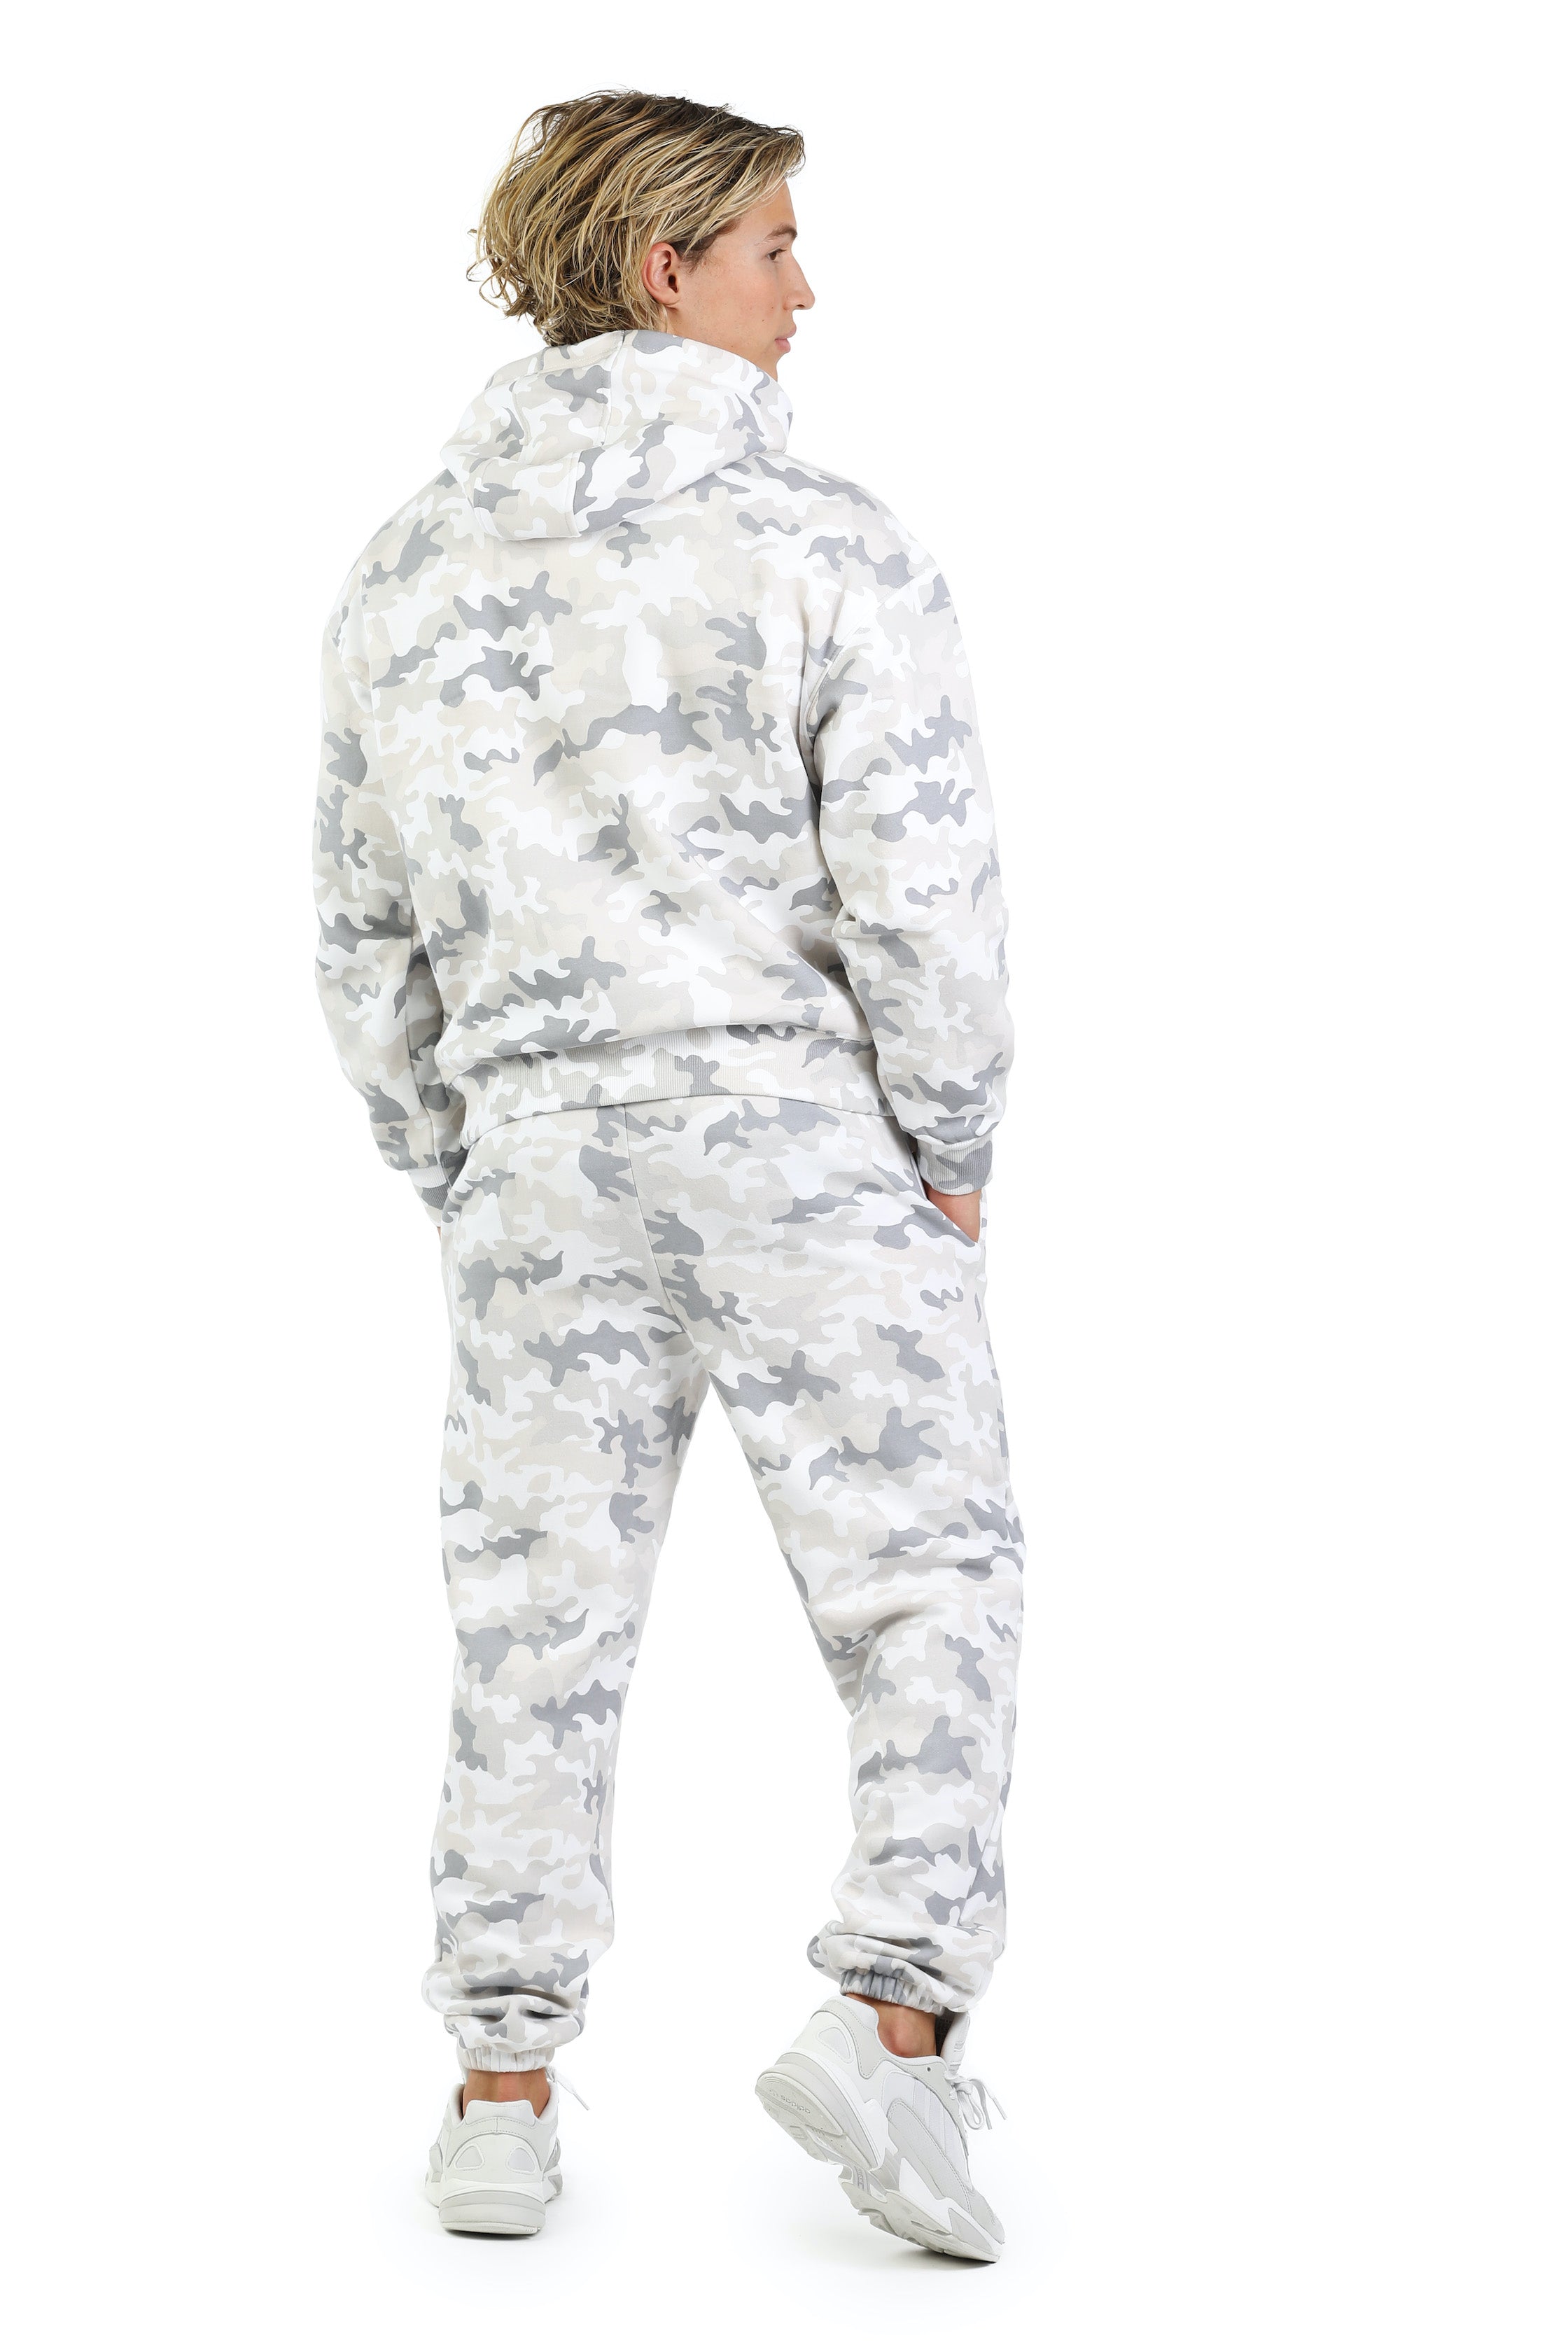 Men's sweatsuit set in white camo from Lazypants - always a great buy at a reasonable price.